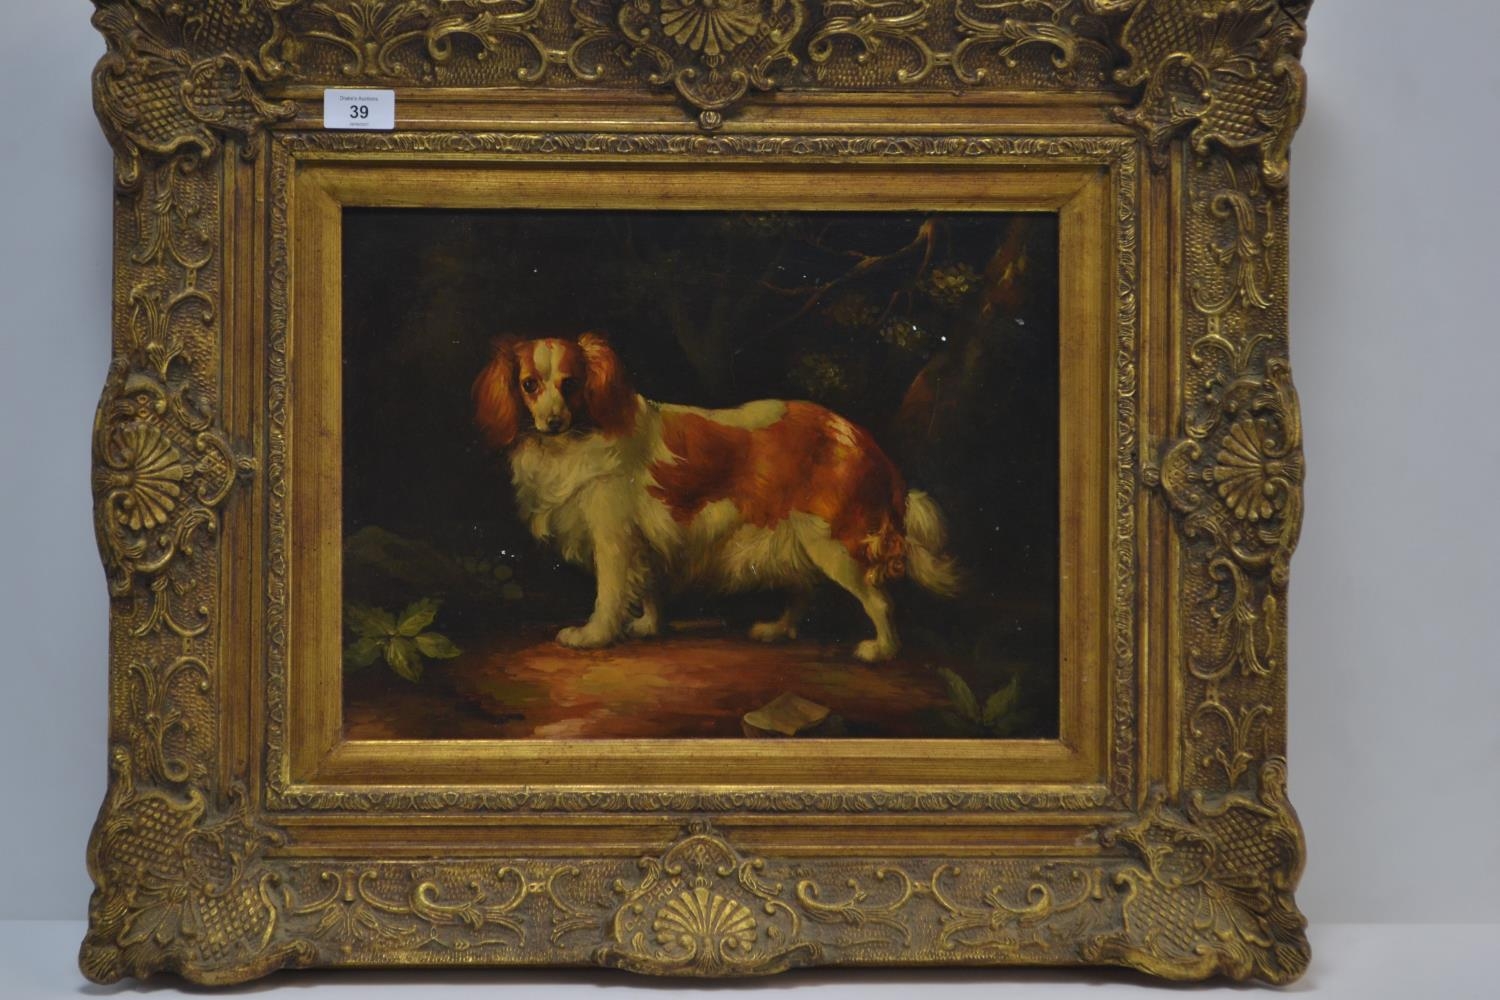 C19 oil on board of a spaniel standing, in an ornate gilt frame. 65cm x 55xm inclusive of frame 